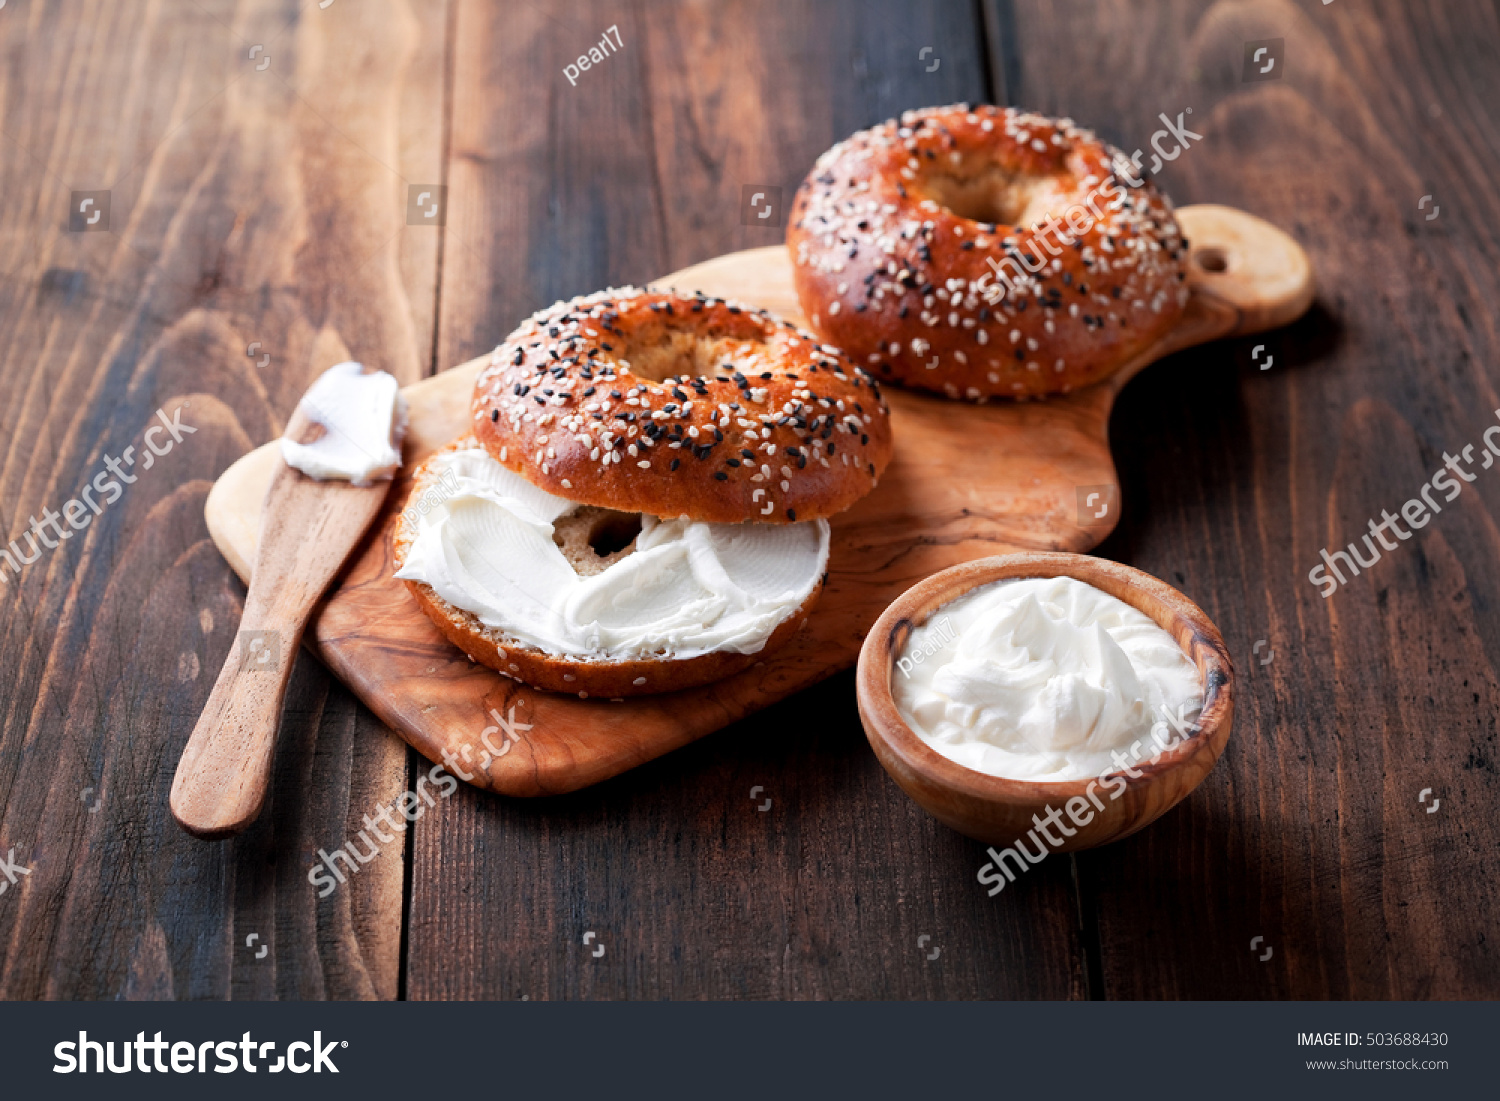 Whole grain bagels with cream cheese on wooden board, selective focus #503688430